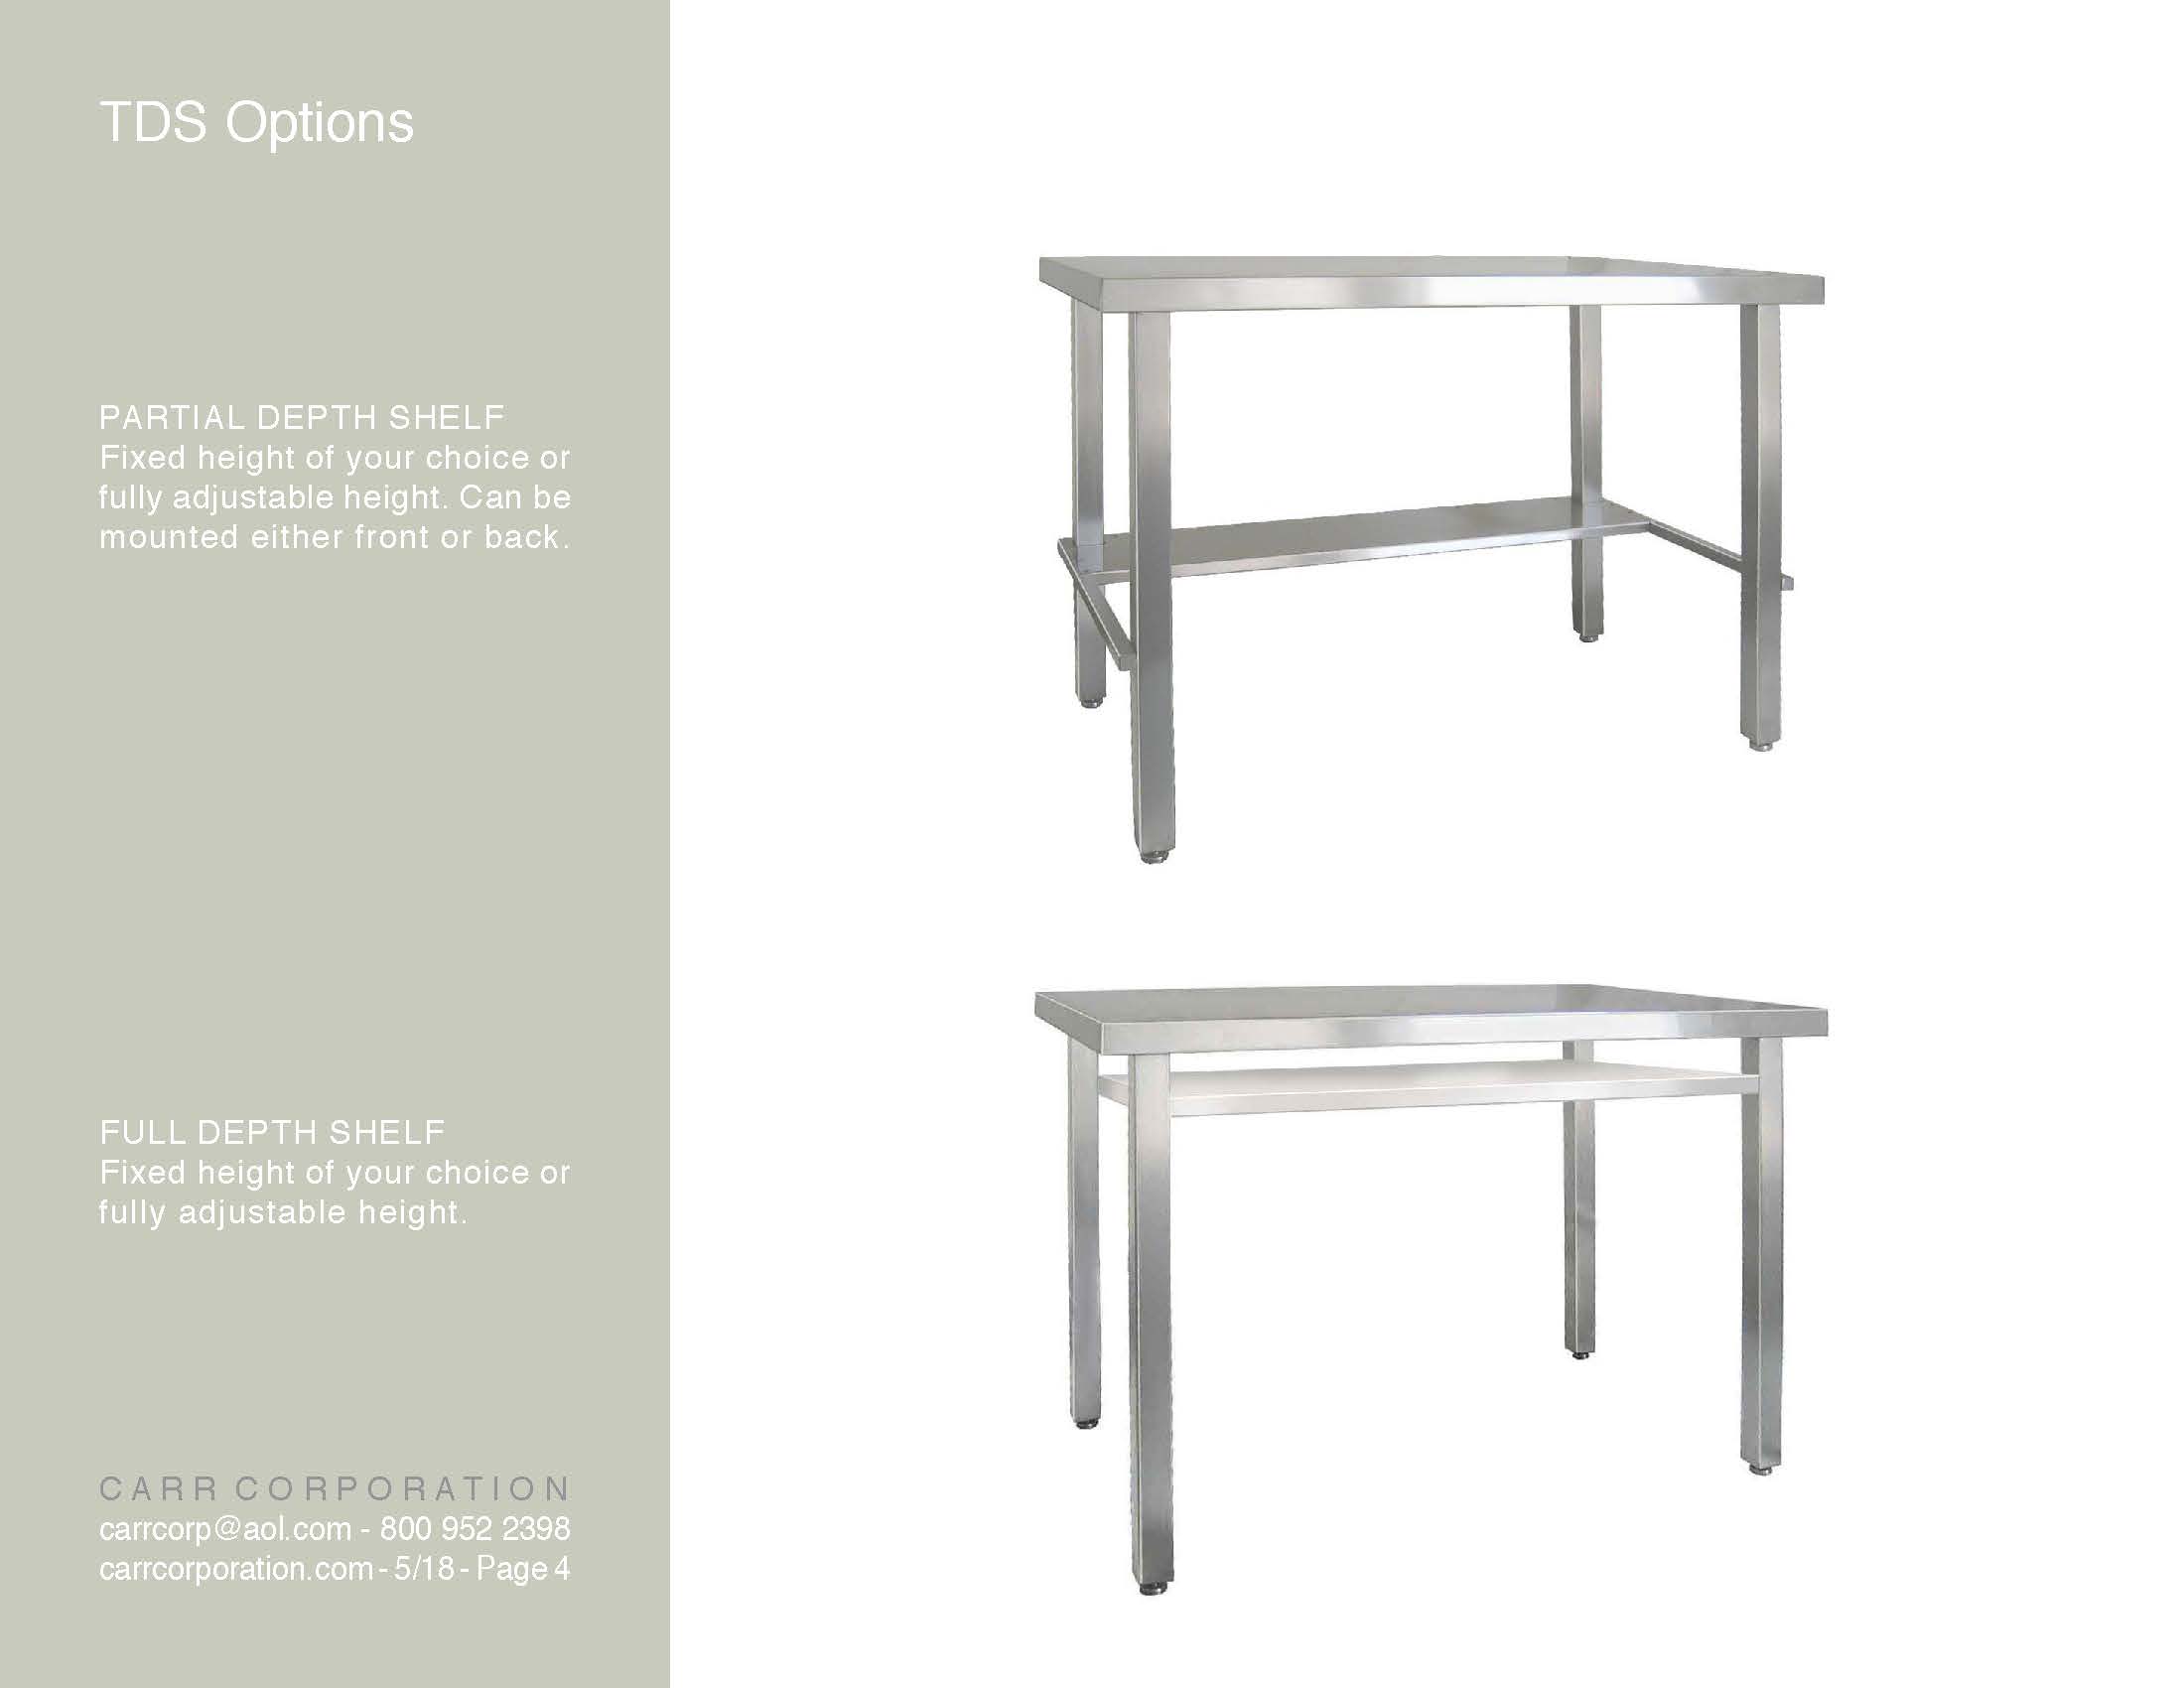 TDS: TABLE / DESK, STAINLESS